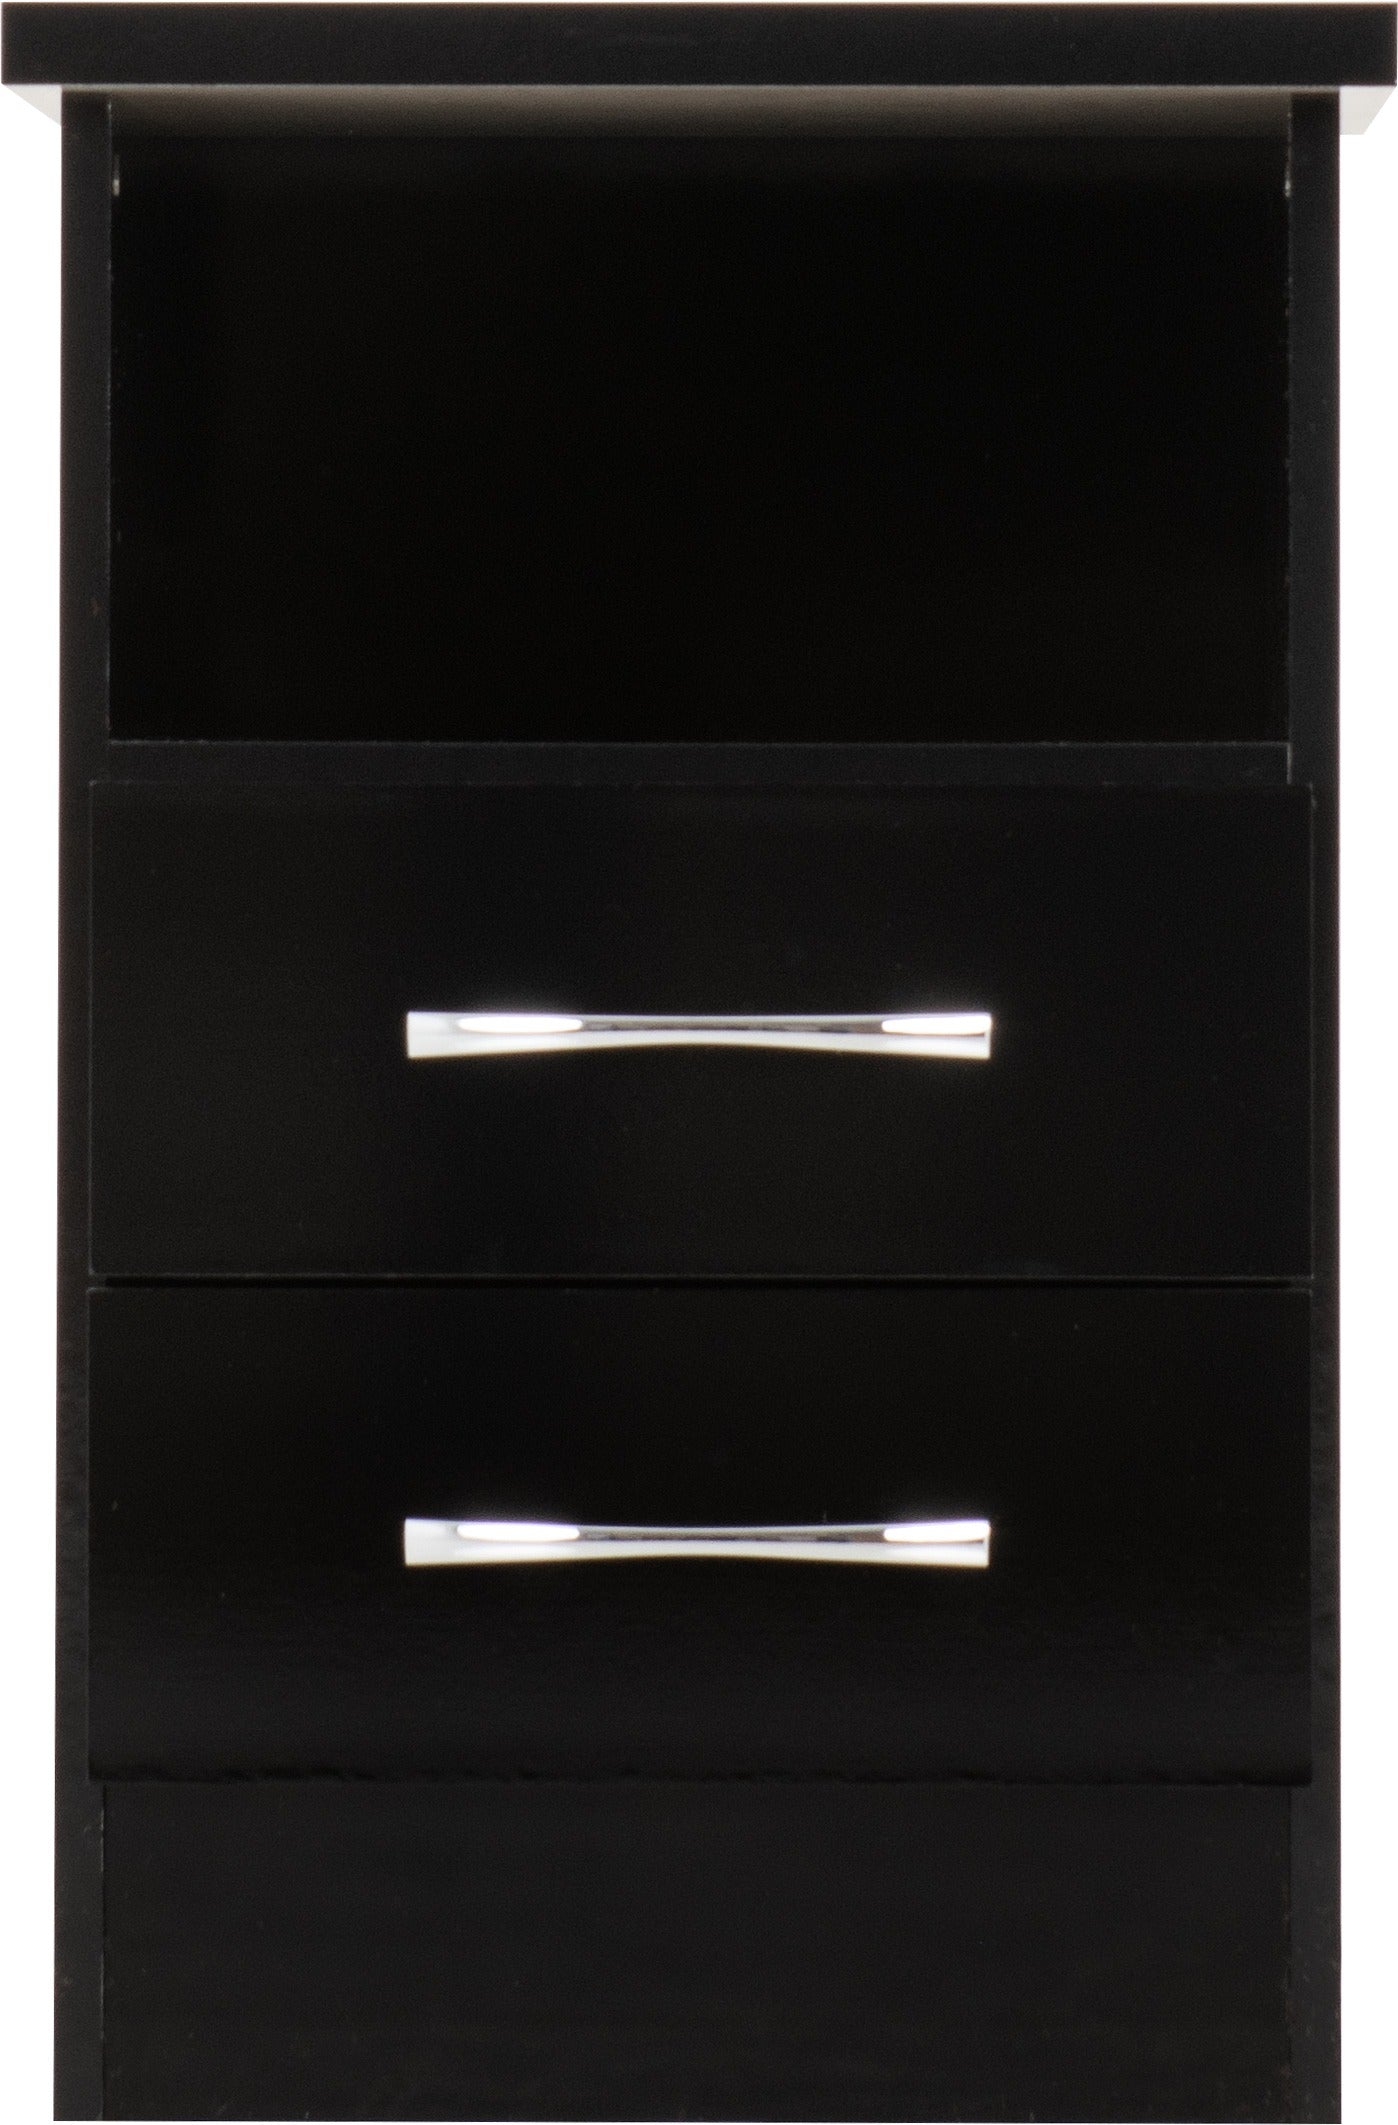 Nevada 2 Drawer Bedside in in Black Gloss Finish